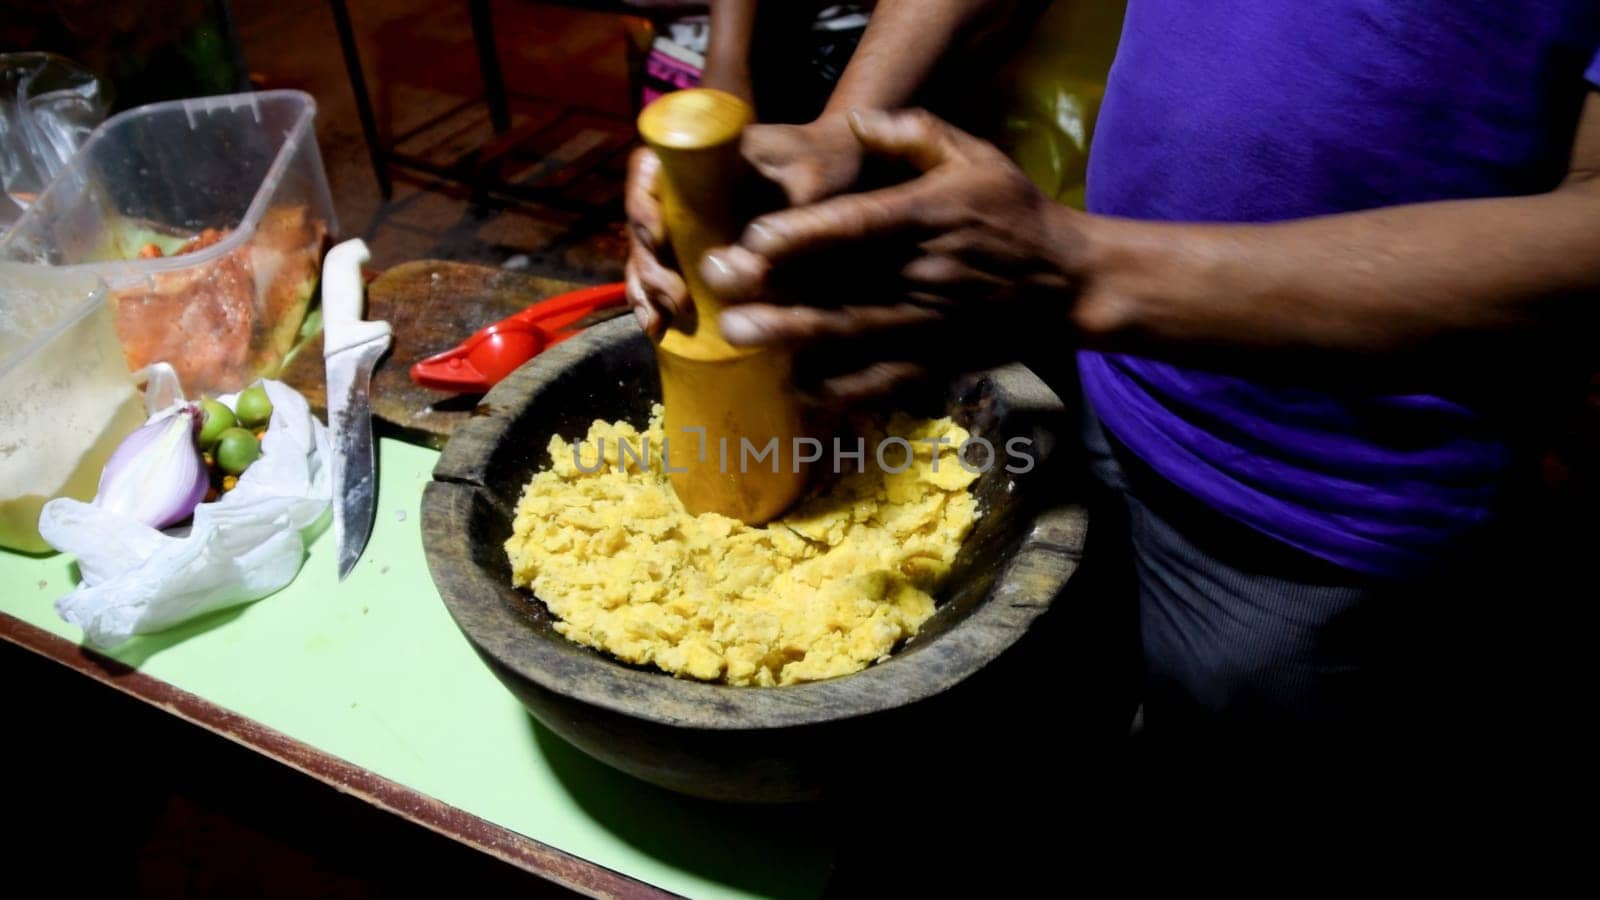 Hands preparing food in a wooden mortar with ingredients nearby on a rustic kitchen table